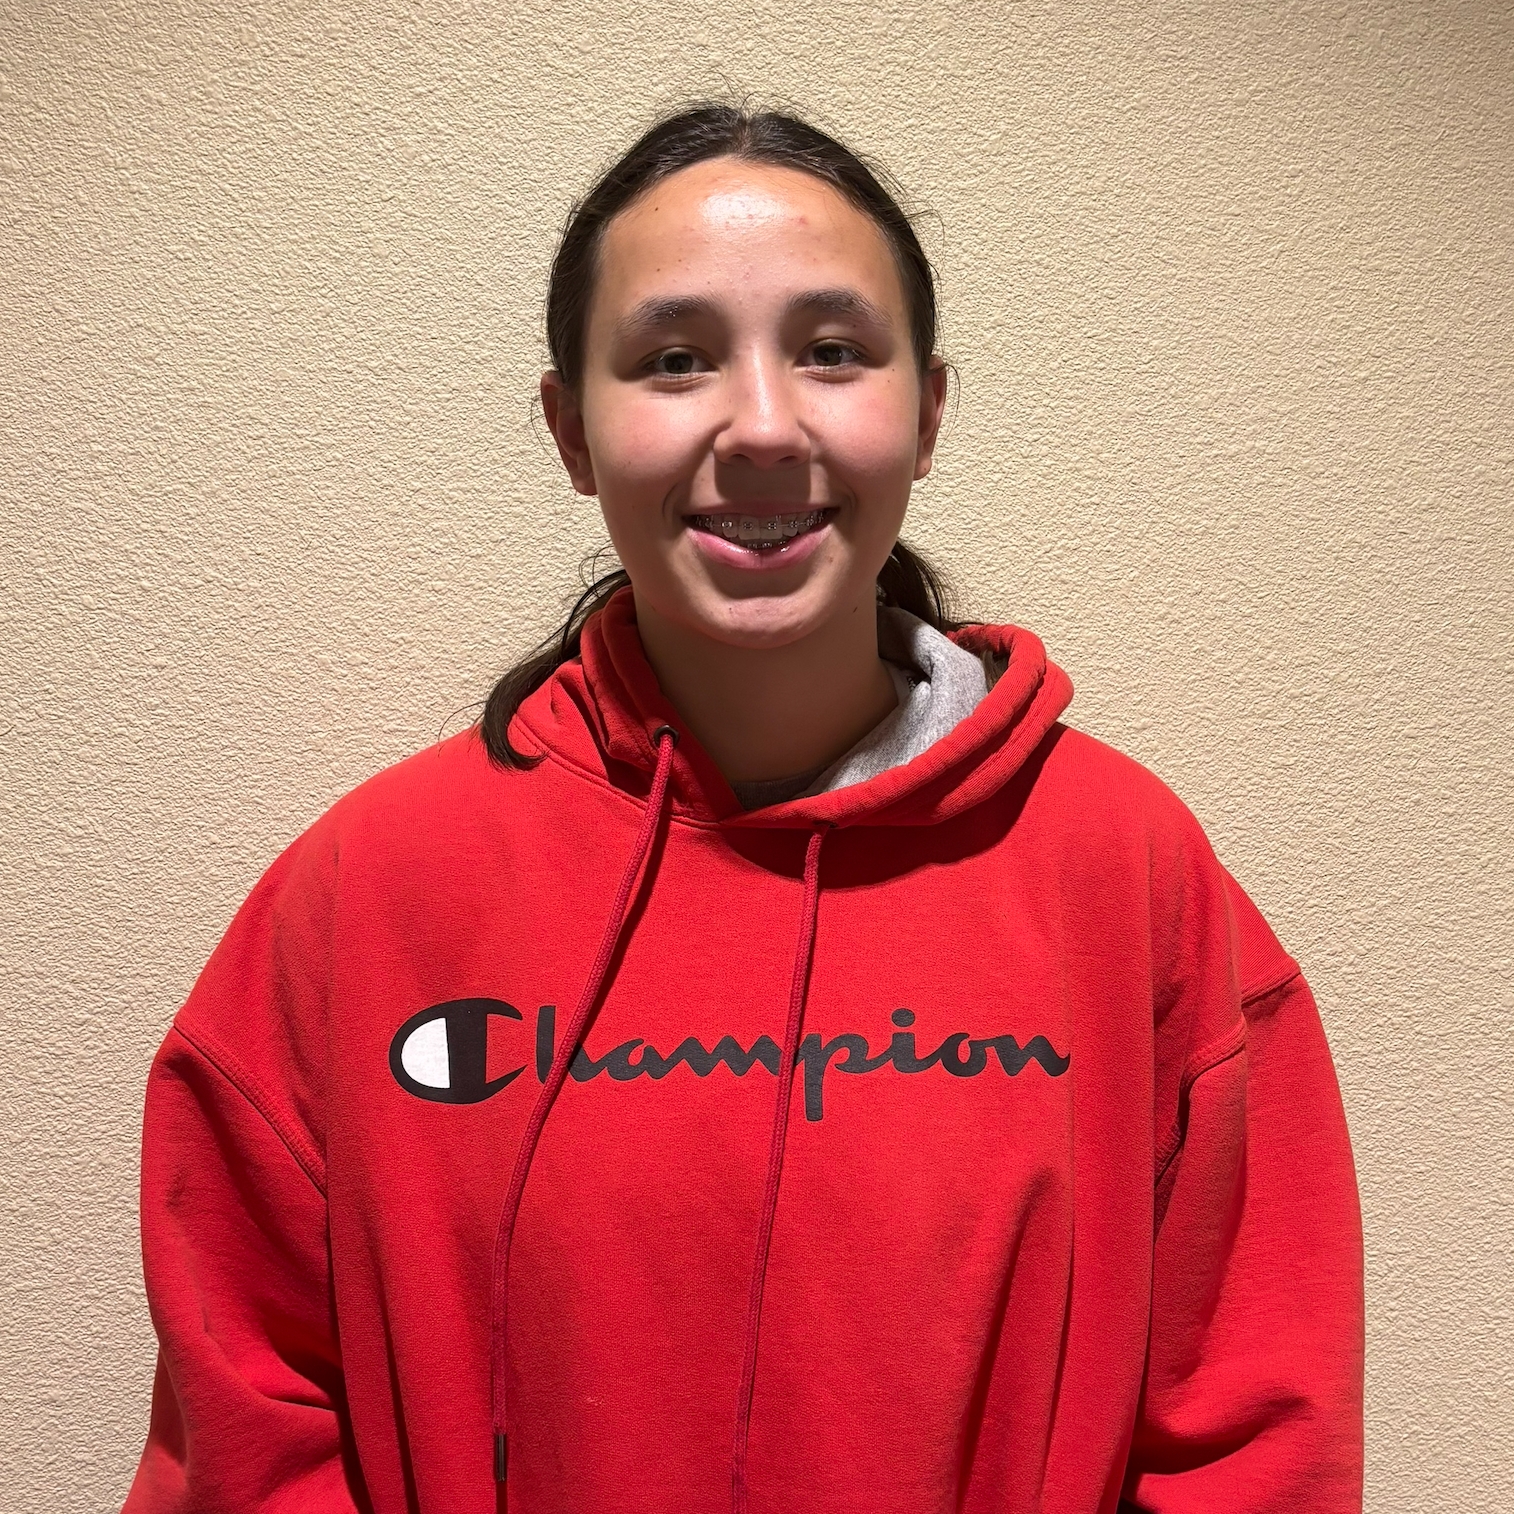 Congratulations to Bailey Brooks, the LCPS Student Athlete of the Week from Las Cruces High School. Bailey competes in basketball, swimming, and tennis for the Bulldawgs. Coach Lori Shelby says Bailey has a positive attitude, great work ethic, and is an all-around amazing person with the respect of her teammates and coaches.   Interests outside of sports include: Chess Club, HOSA, MESA, Students for Sustainability, Science Olympiad, National Honors Society, and Enlace.